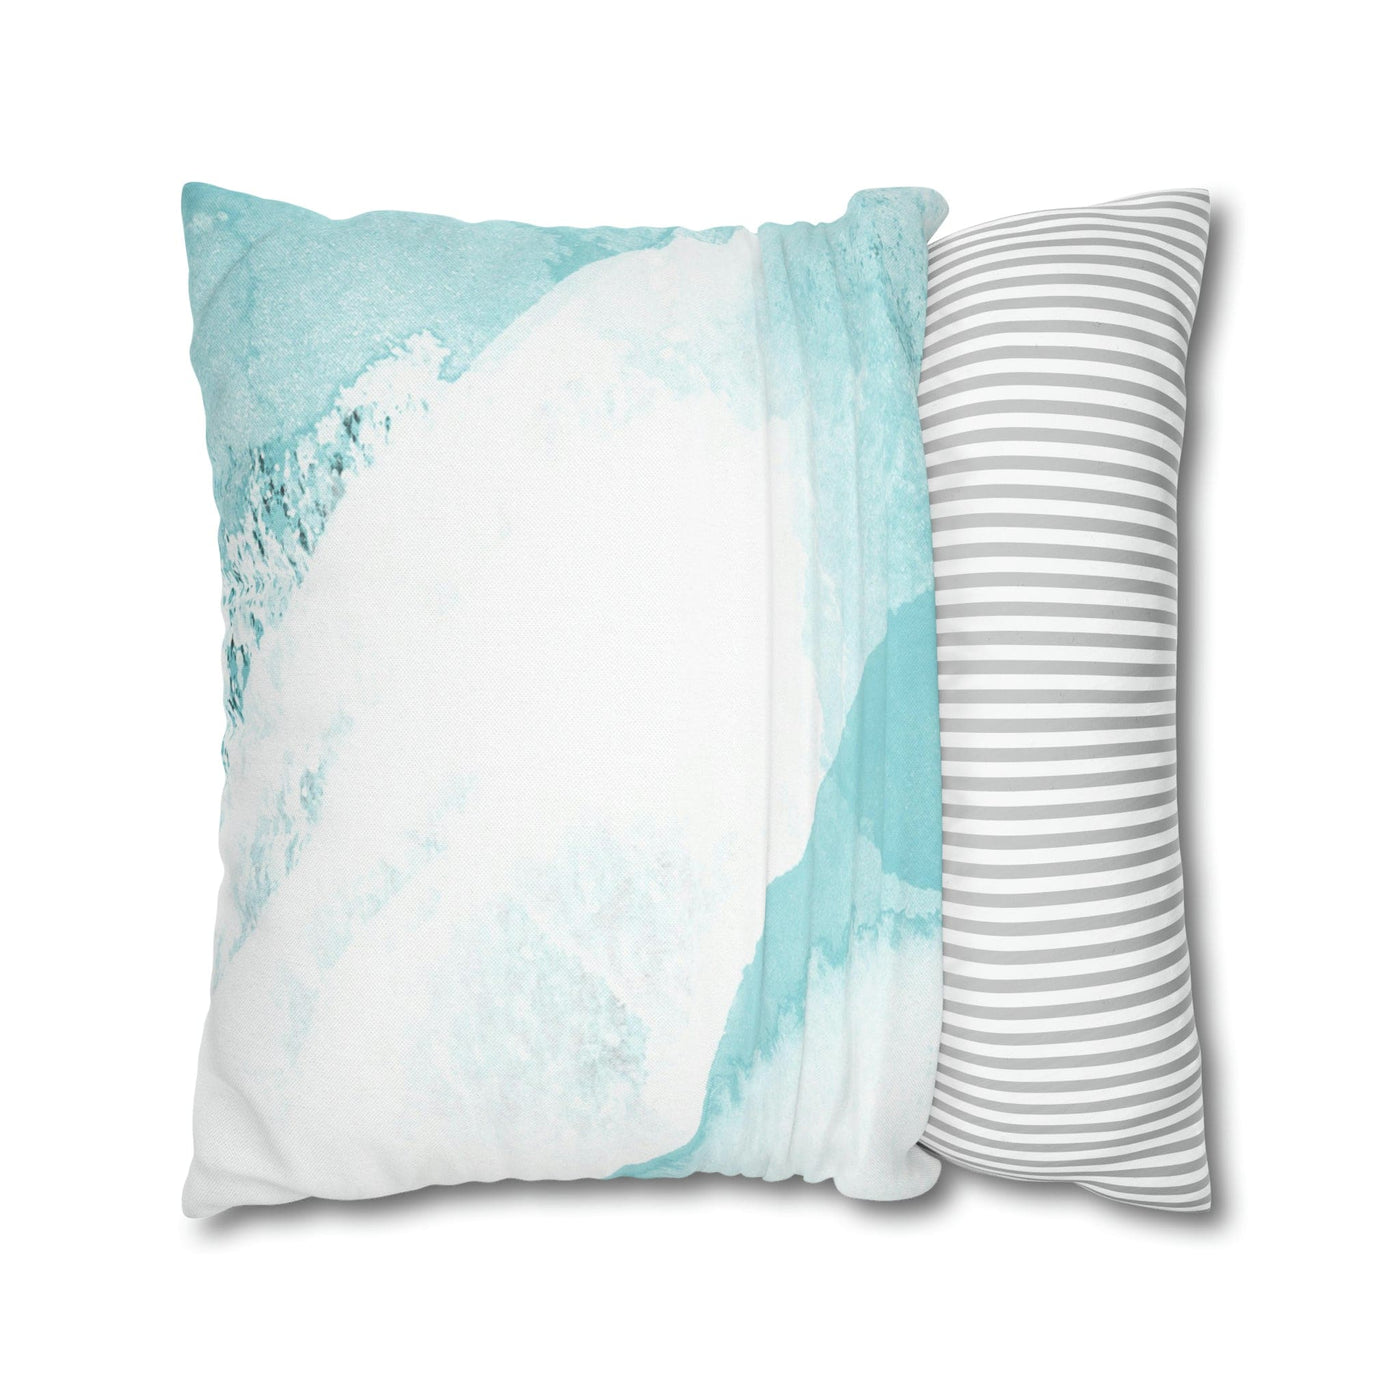 Decorative Throw Pillow Covers With Zipper - Set Of 2 Subtle Abstract Ocean